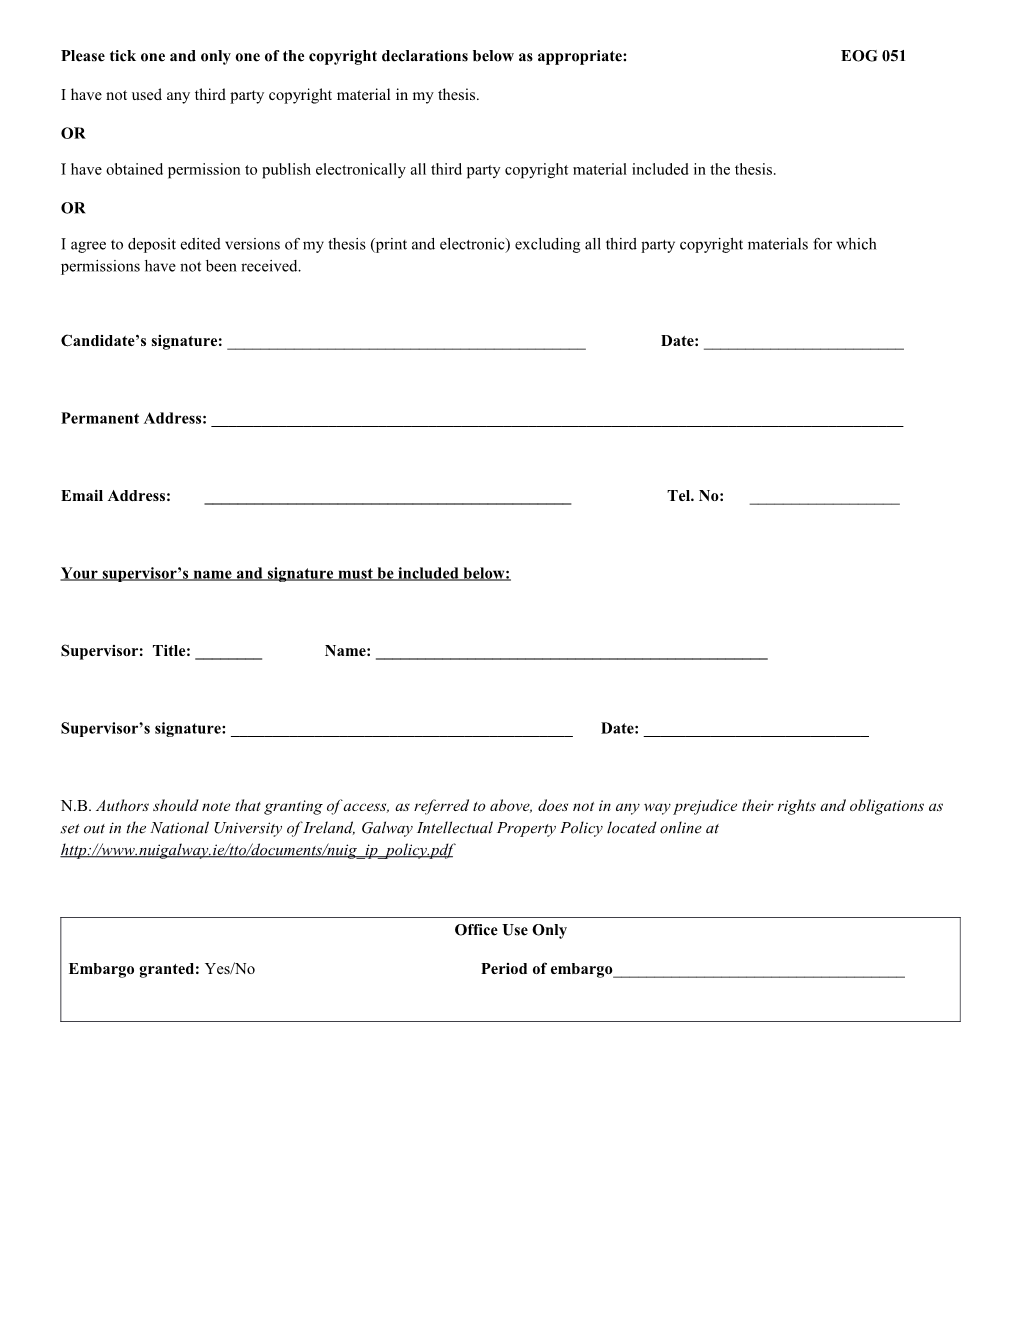 Library Submission Form EOG 060